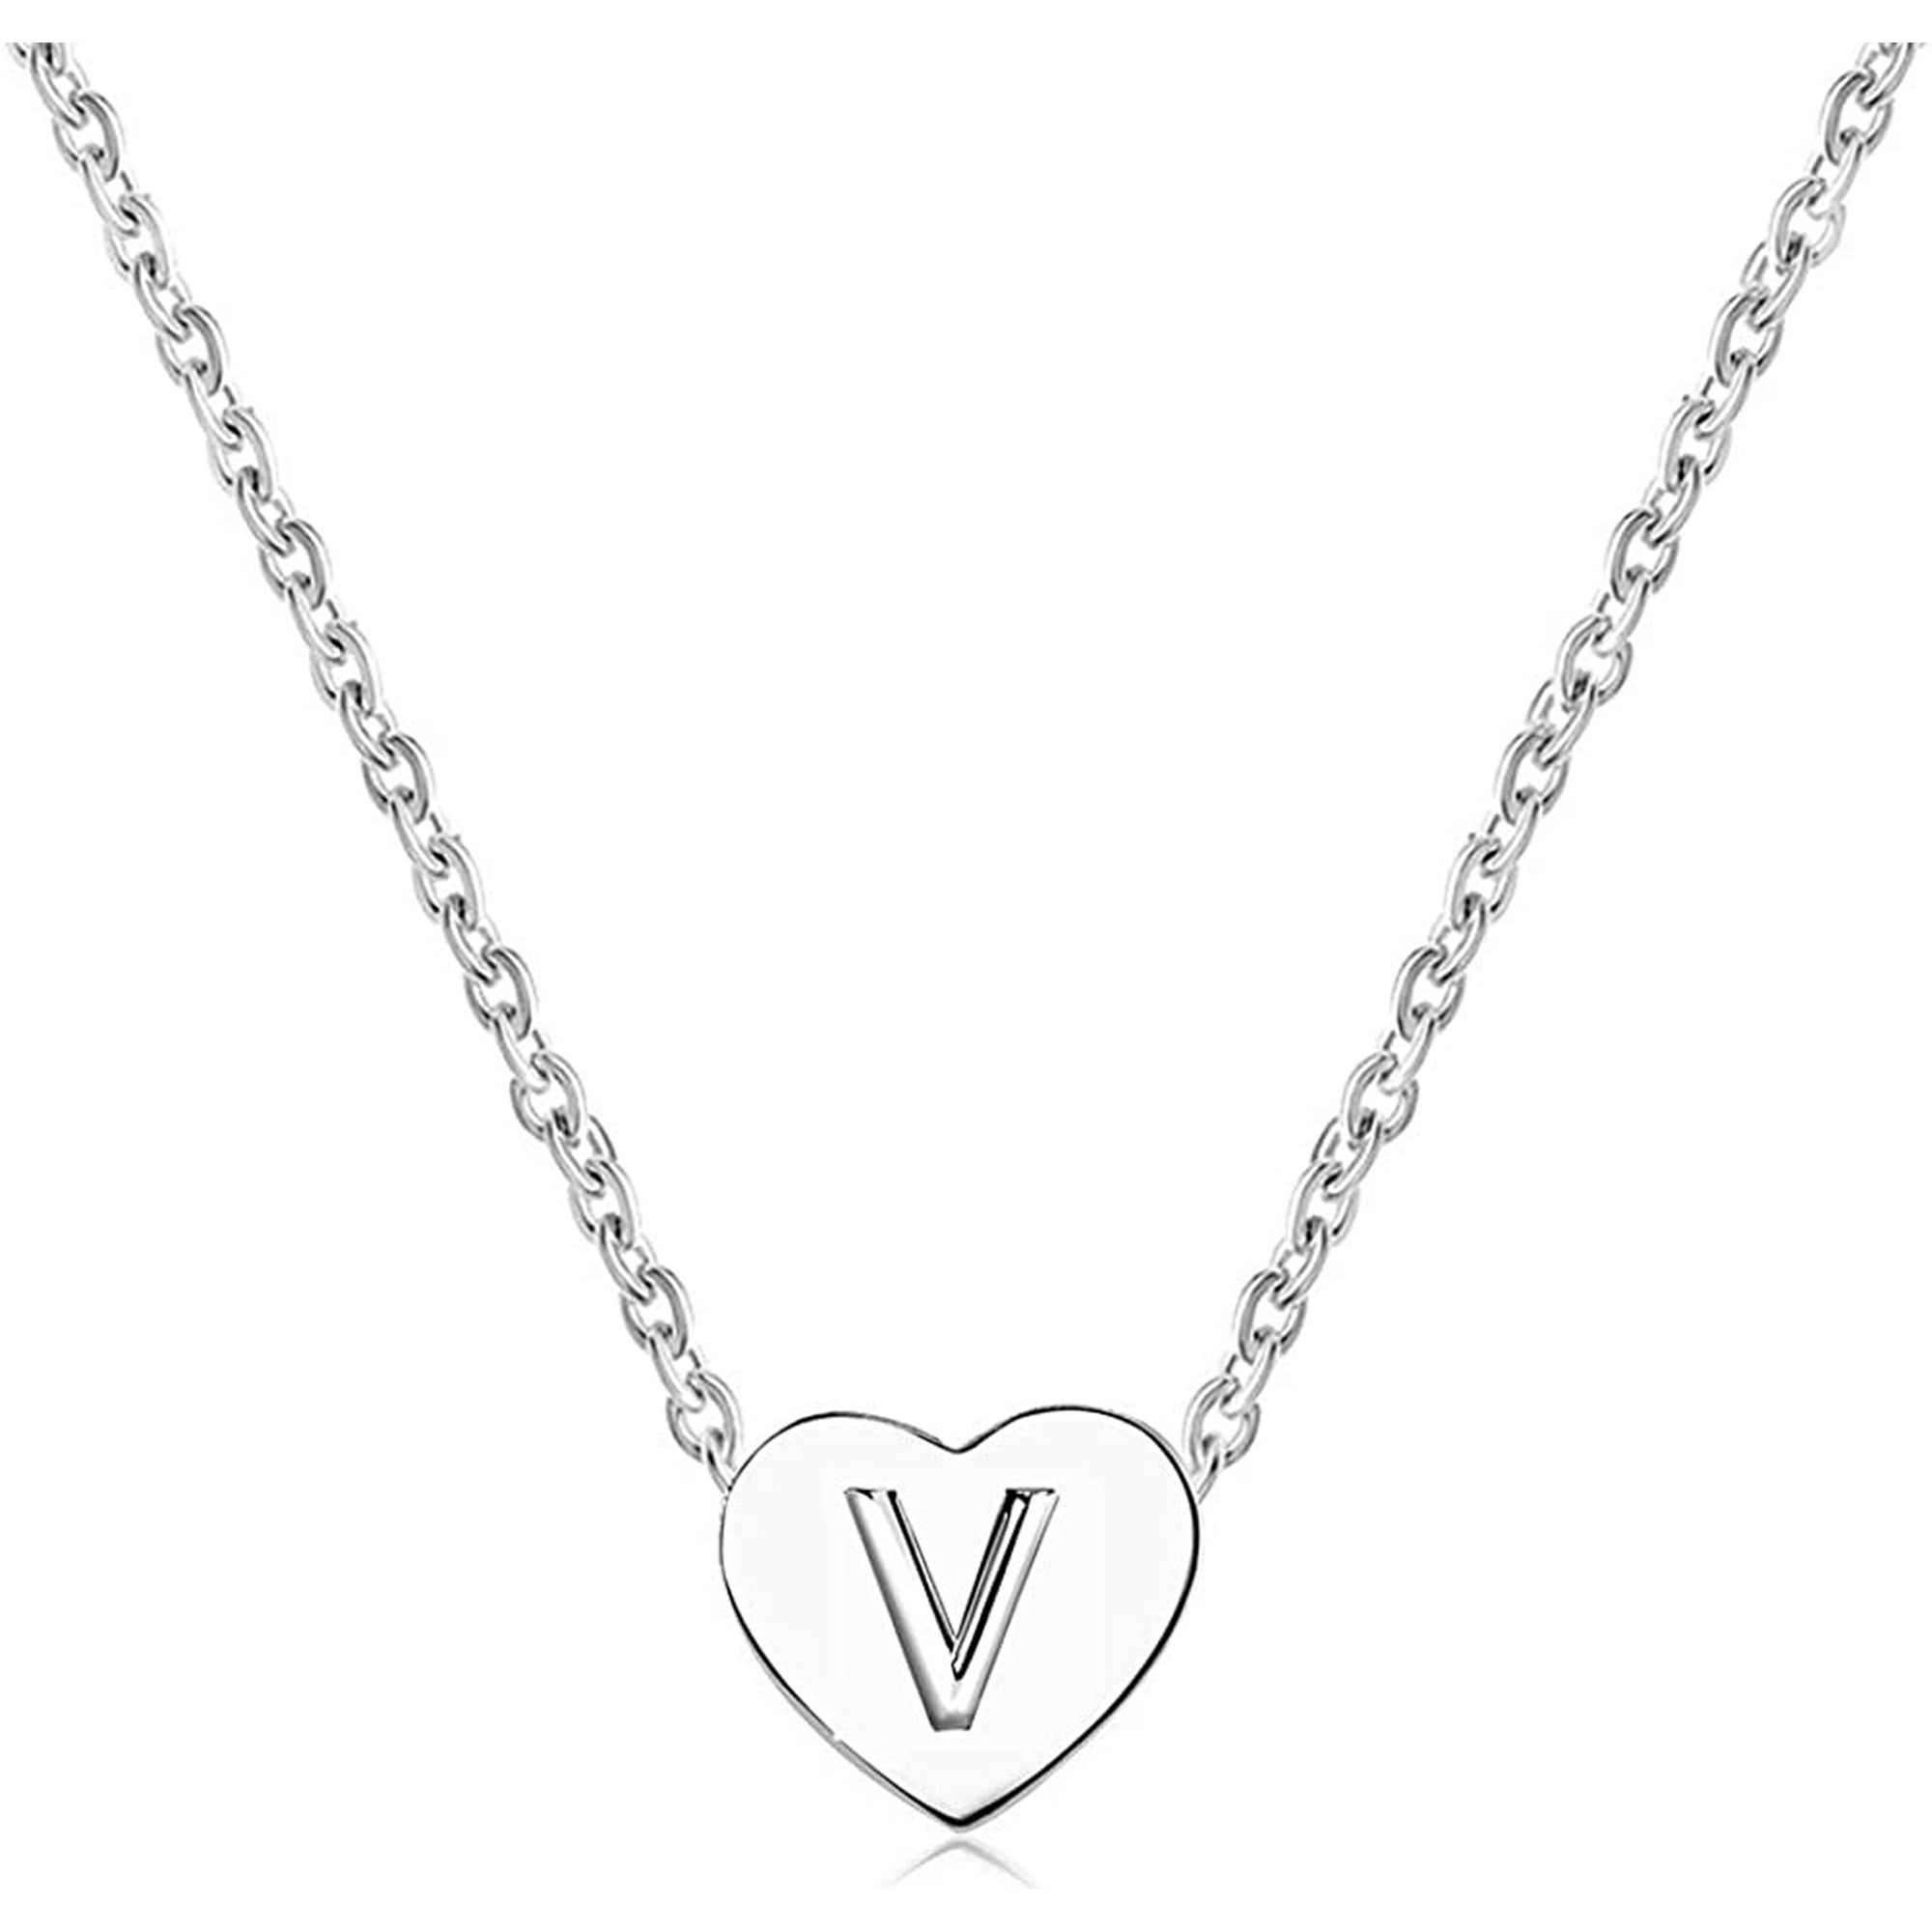 Women Girls Silver Tiny Love Heart Initial Letter Necklace